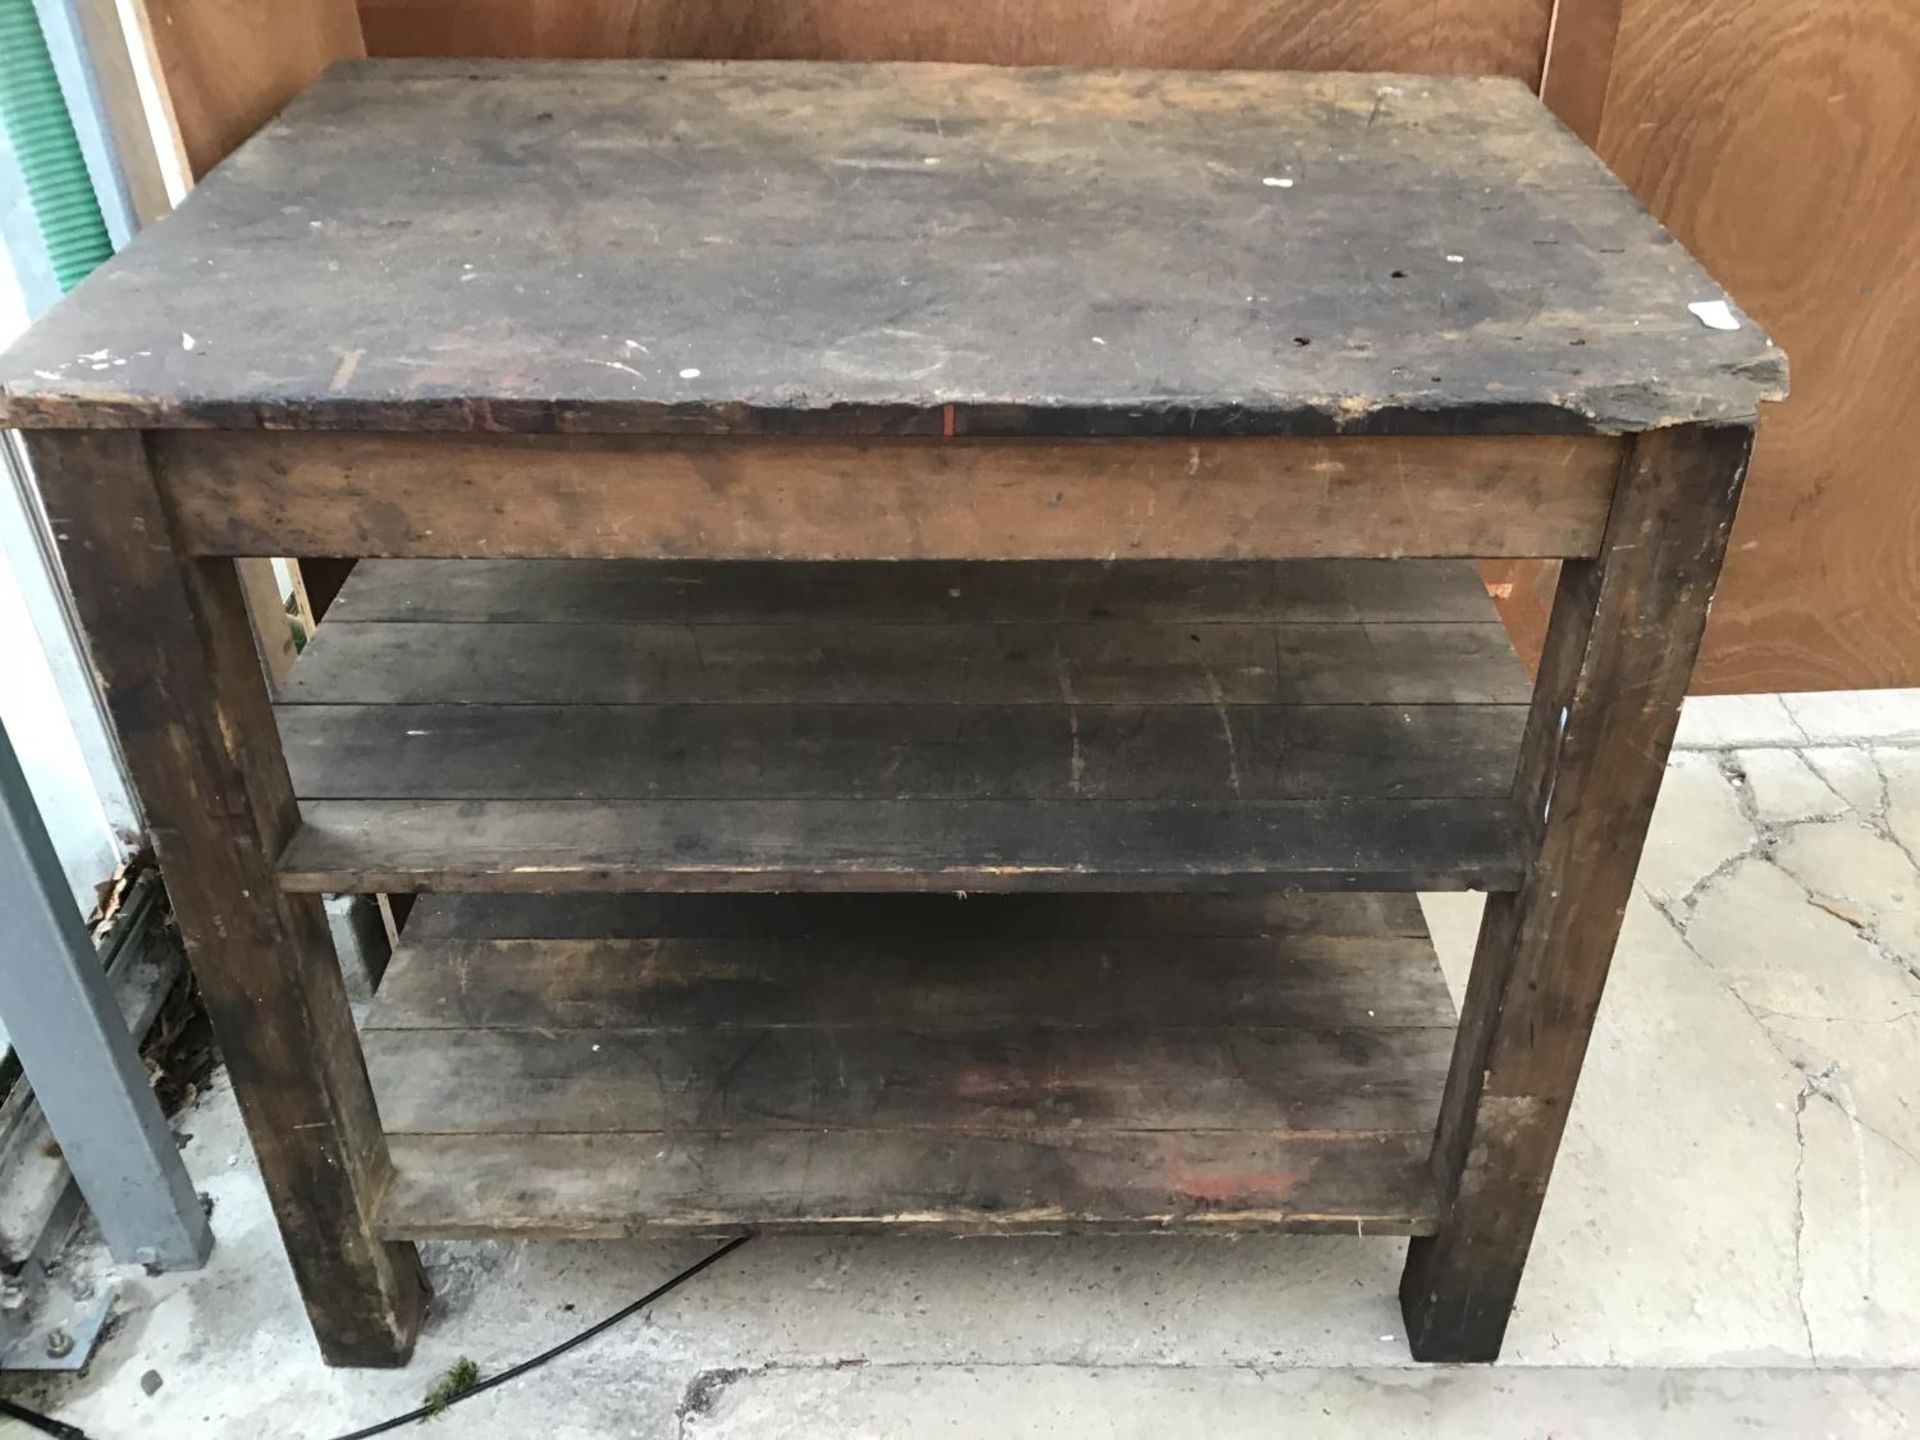 A WOODEN WORK BENCH WITH TWO LOWER SHELVES